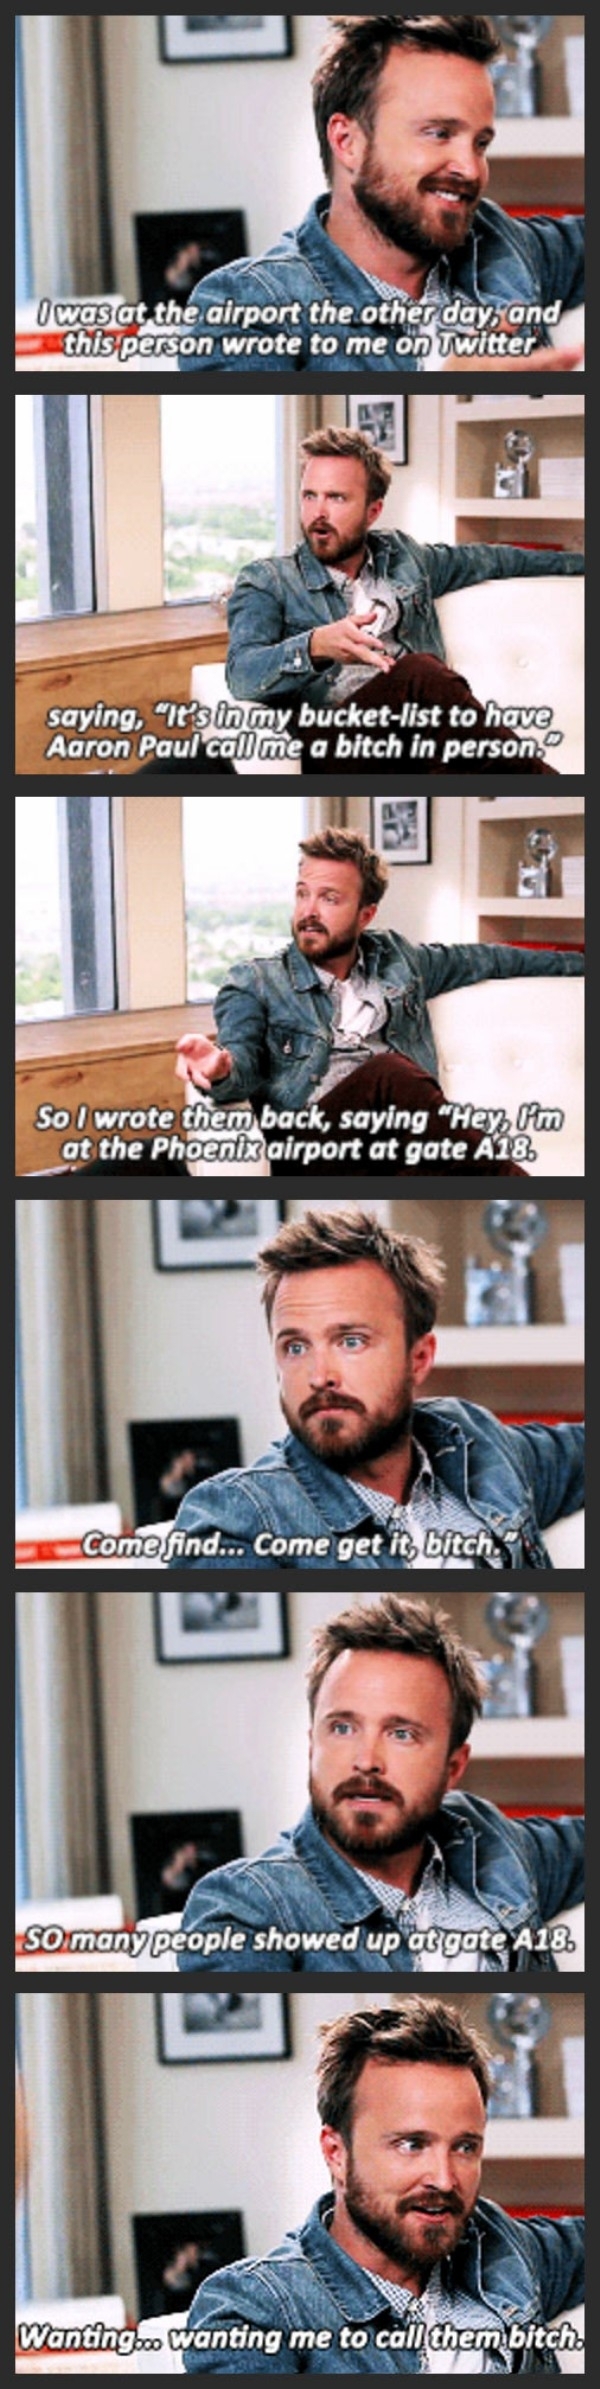 Aaron Paul just wanted to fulfill a bucket list wish for a fan